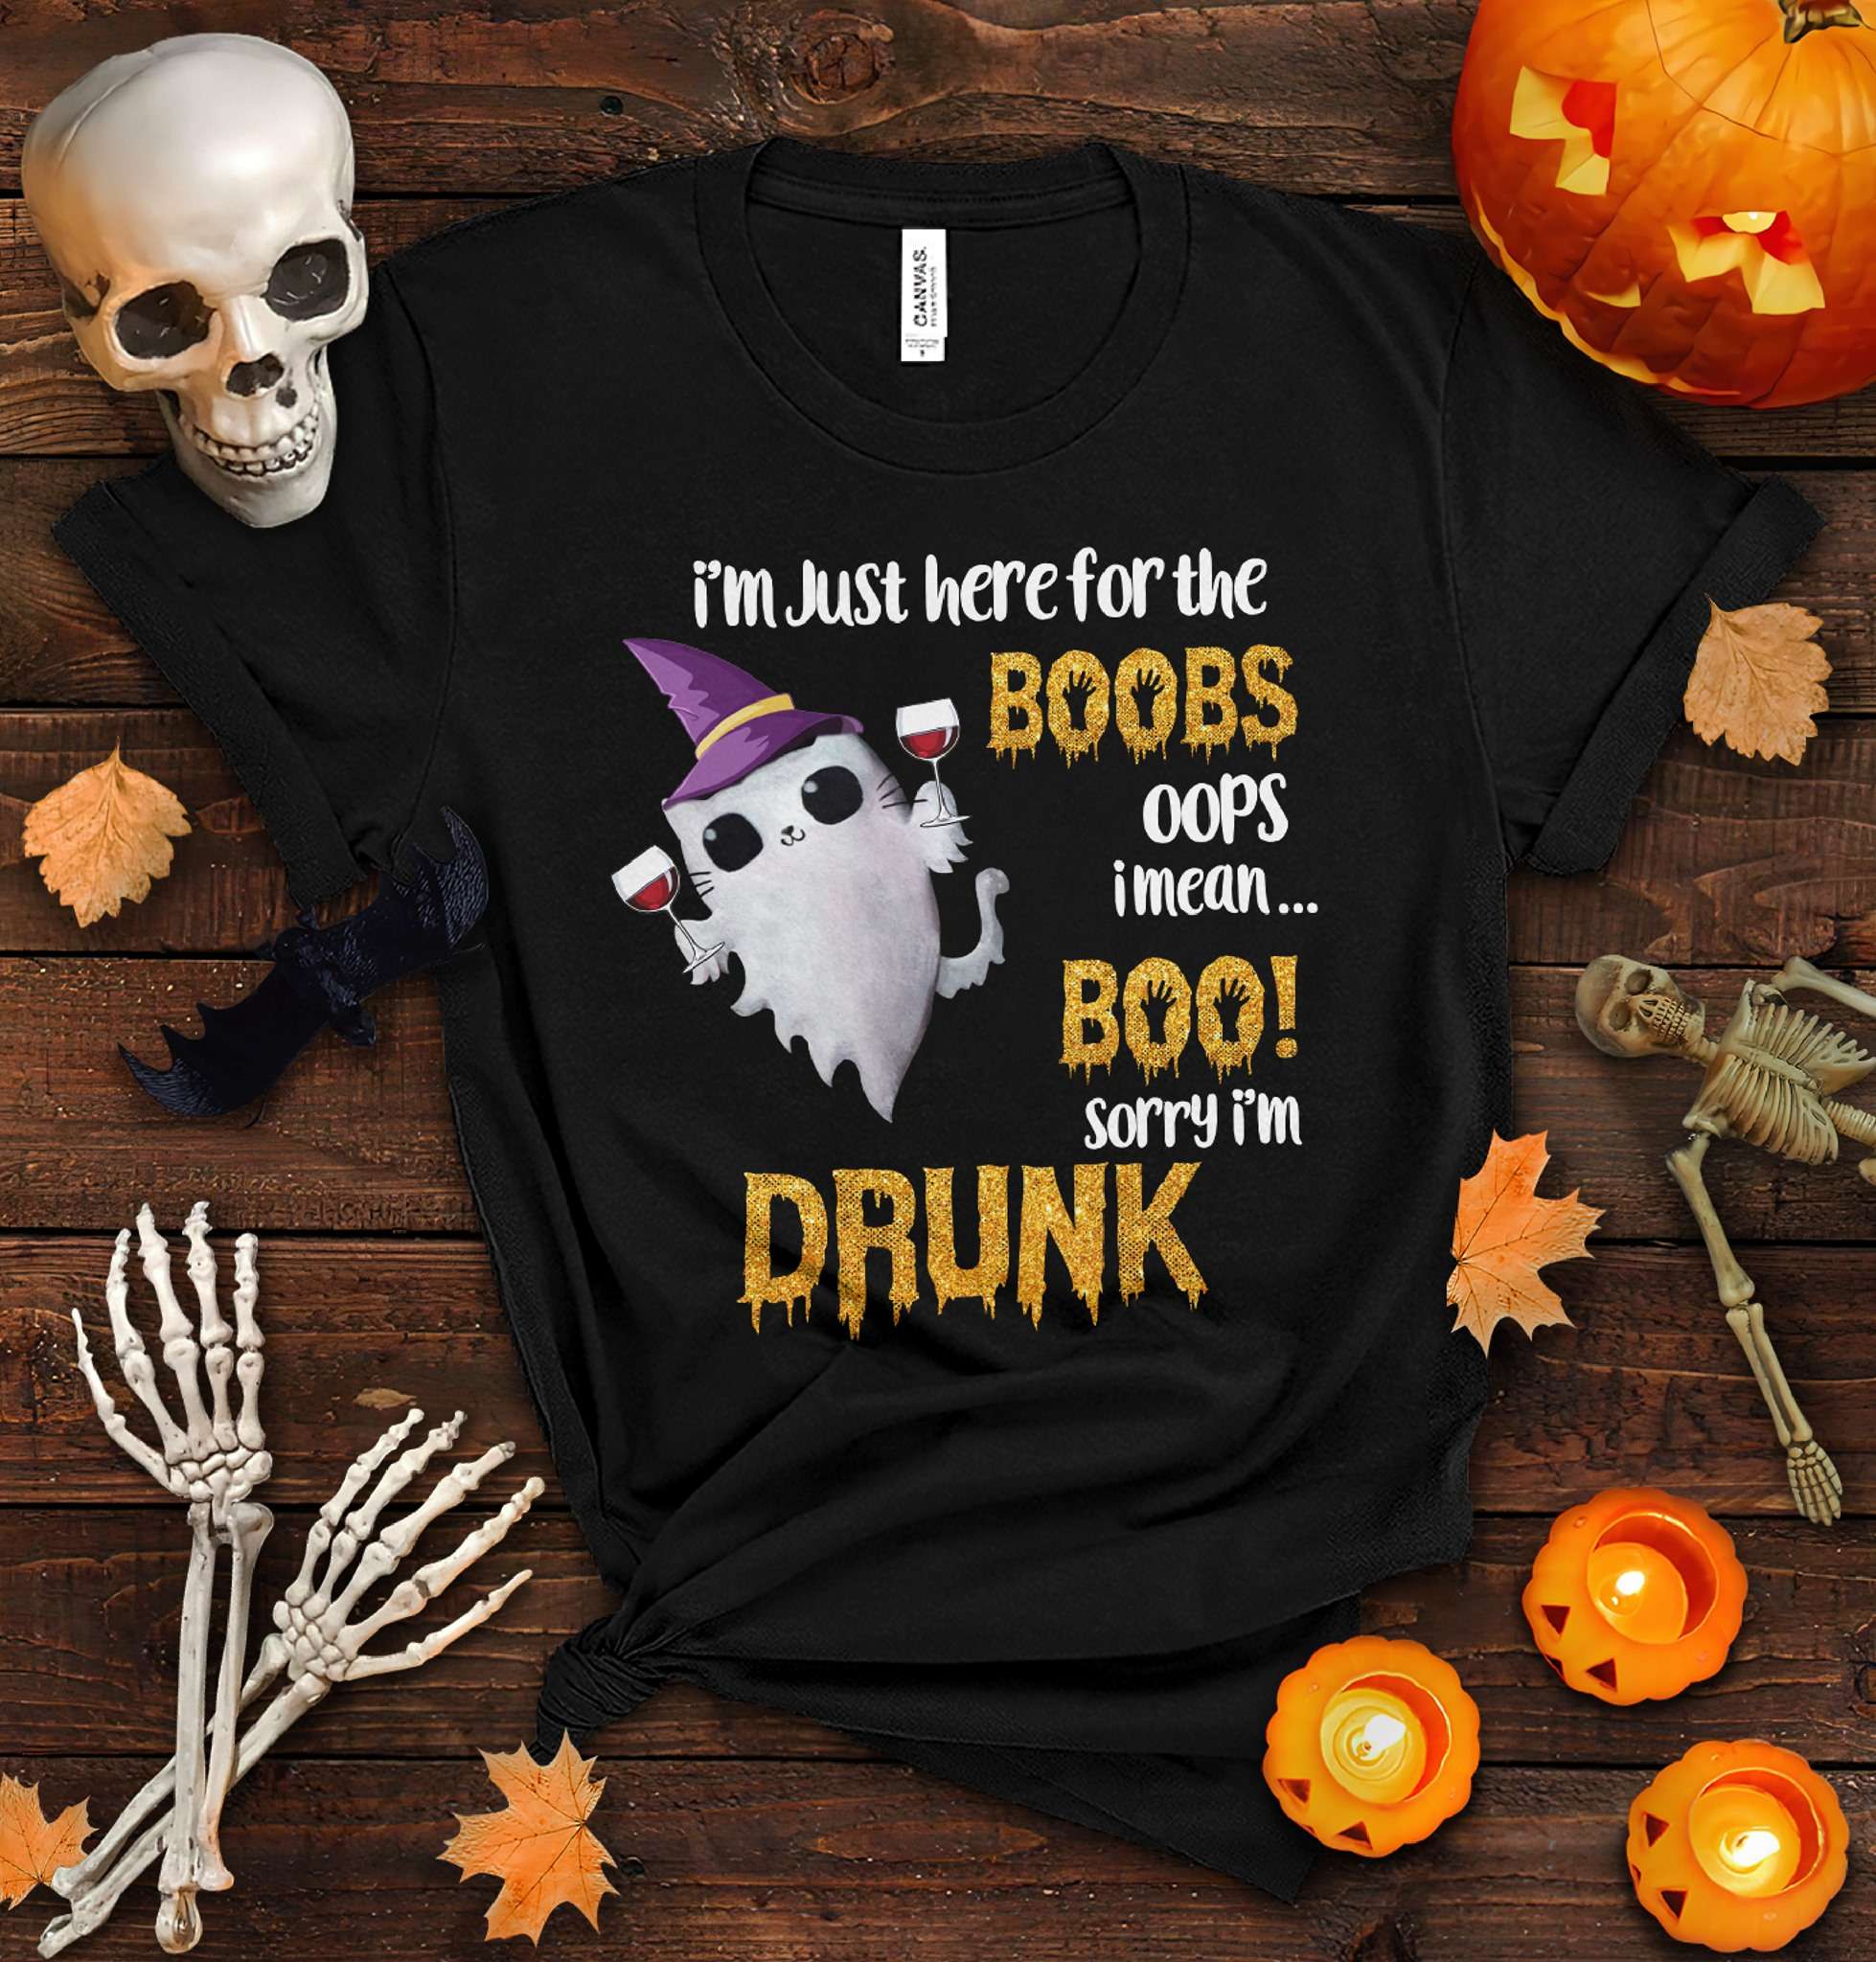 https://fridaystuff.com/wp-content/uploads/2021/11/Im-just-here-for-the-boobs-oops-I-mean-boo-Drunk-white-boo-Halloween-cat-boo.jpg